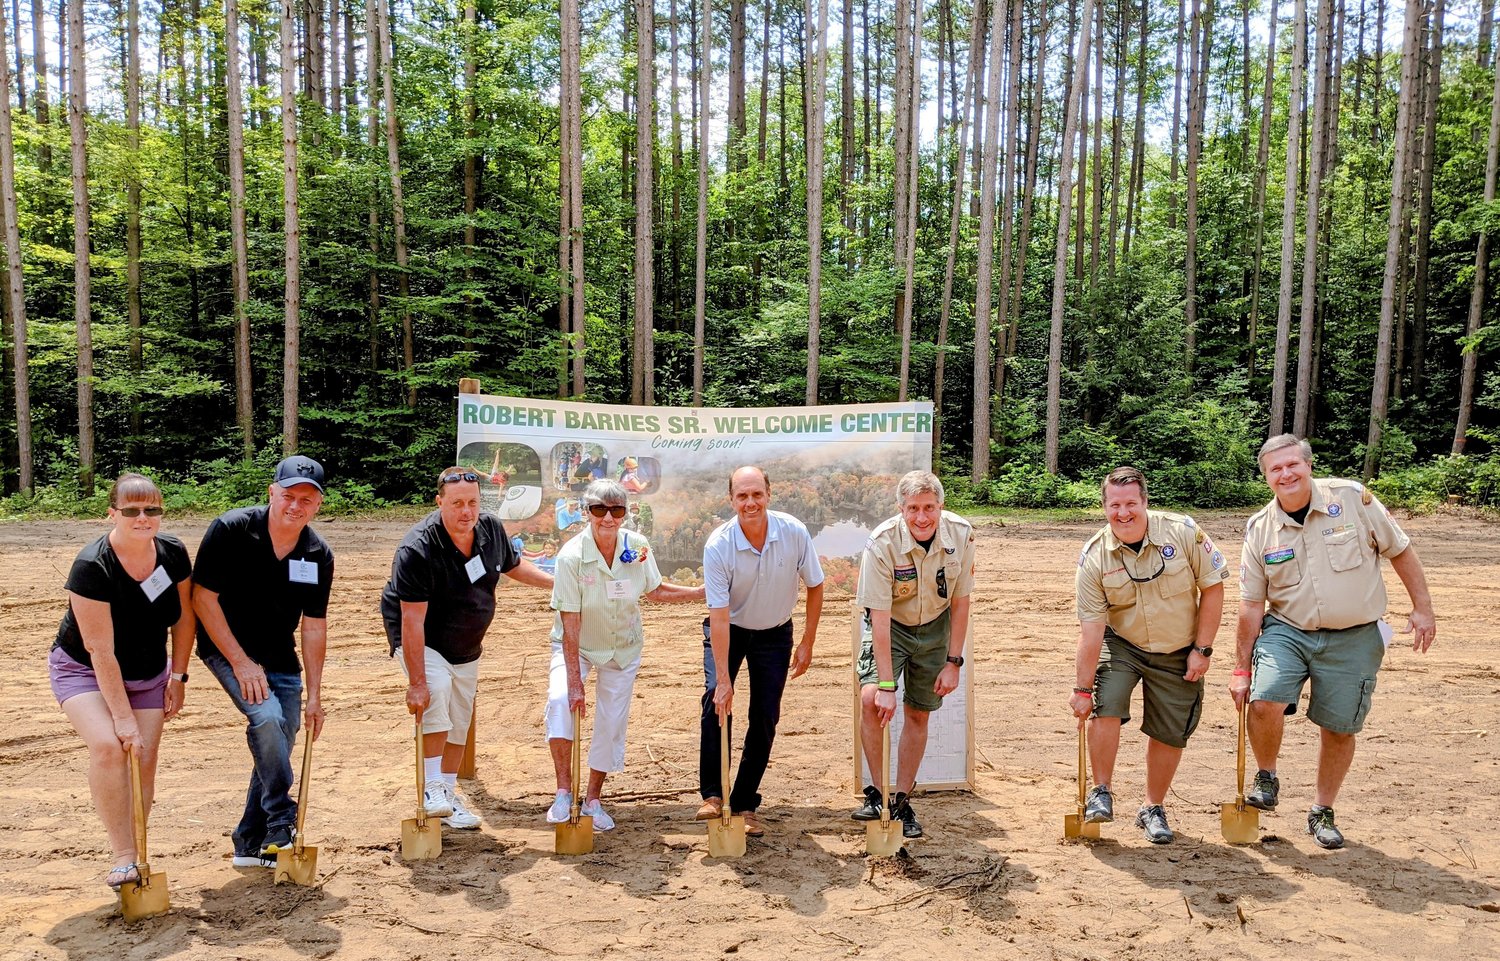 GETTING READY FOR BIG WELCOME (CENTER) — Boy Scout officials, volunteers and donors break ground for the soon-to-be constructed Robert G. “Bob” Barnes, Sr. Welcome Center at Camp Kinglsey, 5328 Tuffy Road, off of North Ava Road, in Ava. The facility, officials said, will be a warm and inviting space for guests to check into camp, relax in the lounge, use the restroom upon arrival and even take care of their health paperwork. From left: Sally Barnes; Bob Barnes, Jr.; Bill Barnes; Patricia Barnes; Steve Barnes; Rob Mahardy, camp director; Matthew Dziedzic, council president; and Raymond Eschenbach, Leatherstocking Council CEO.